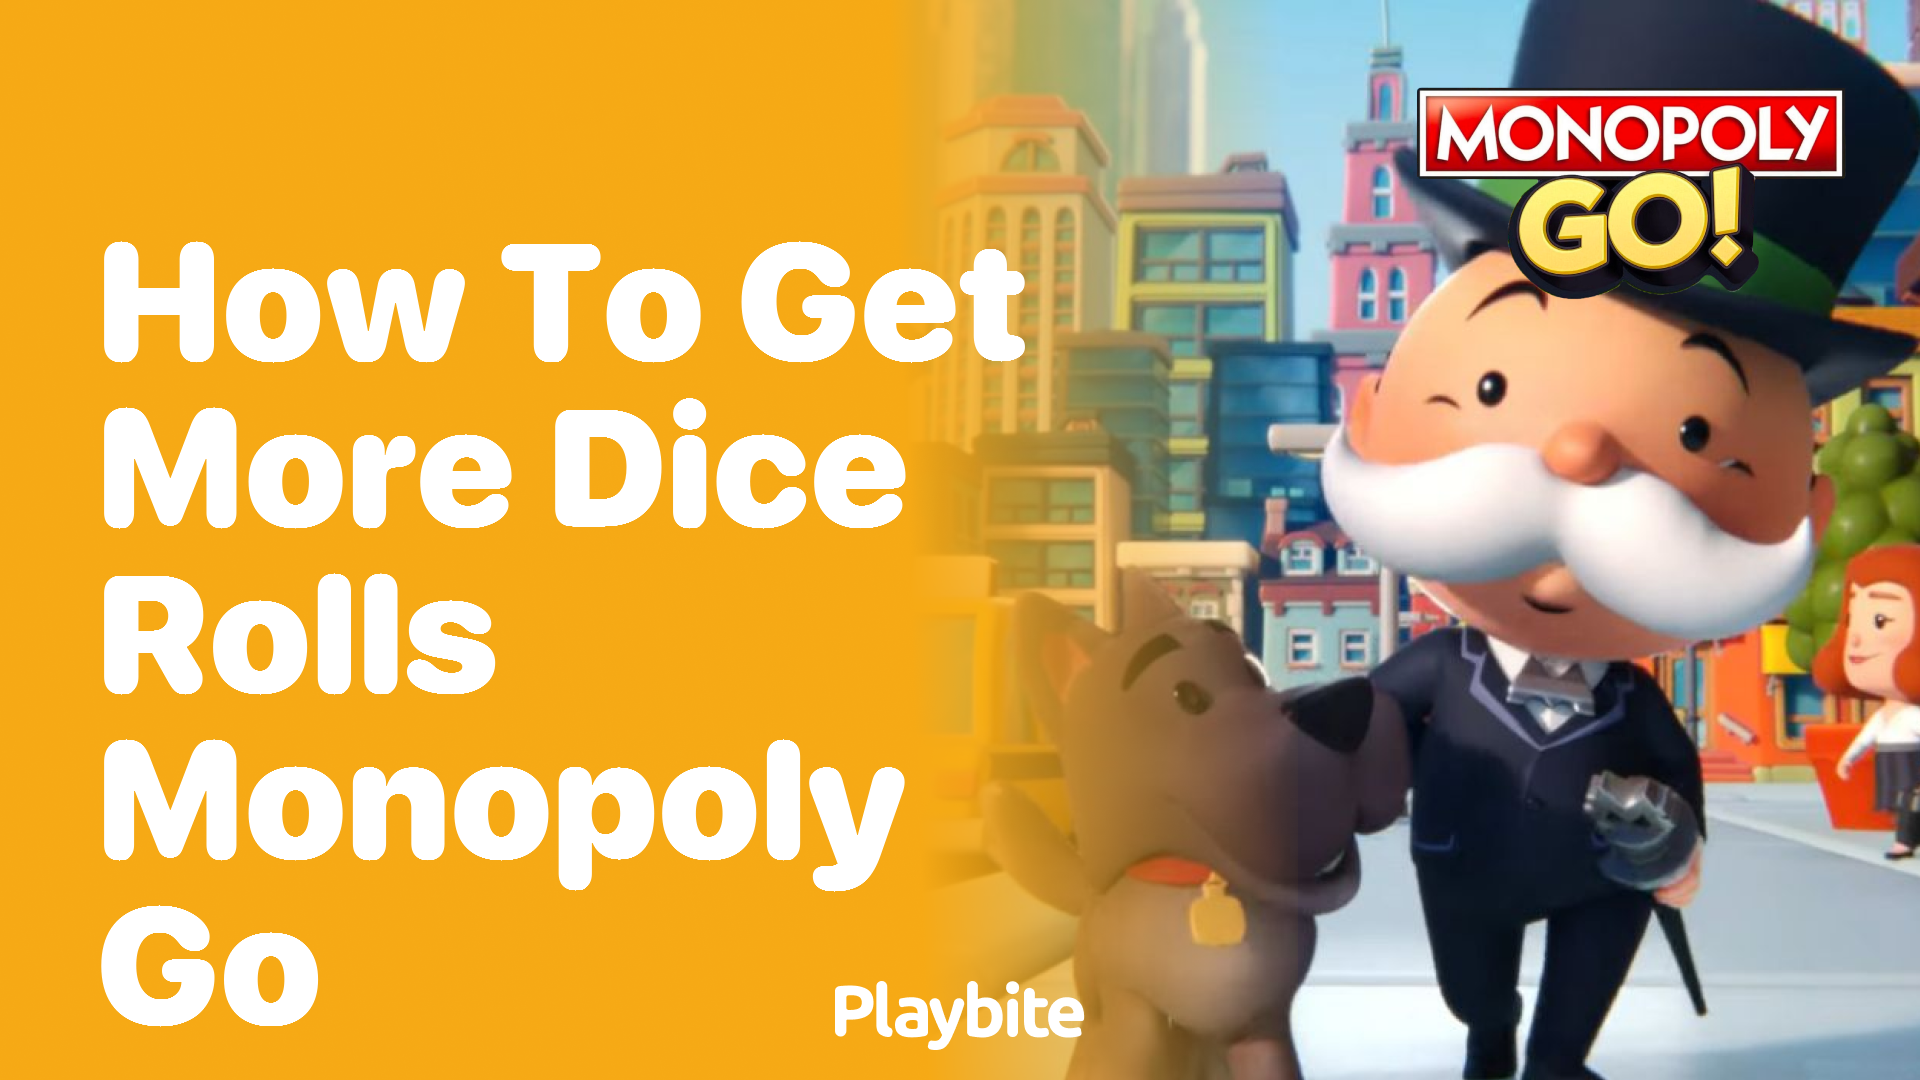 How to Get More Dice Rolls in Monopoly Go